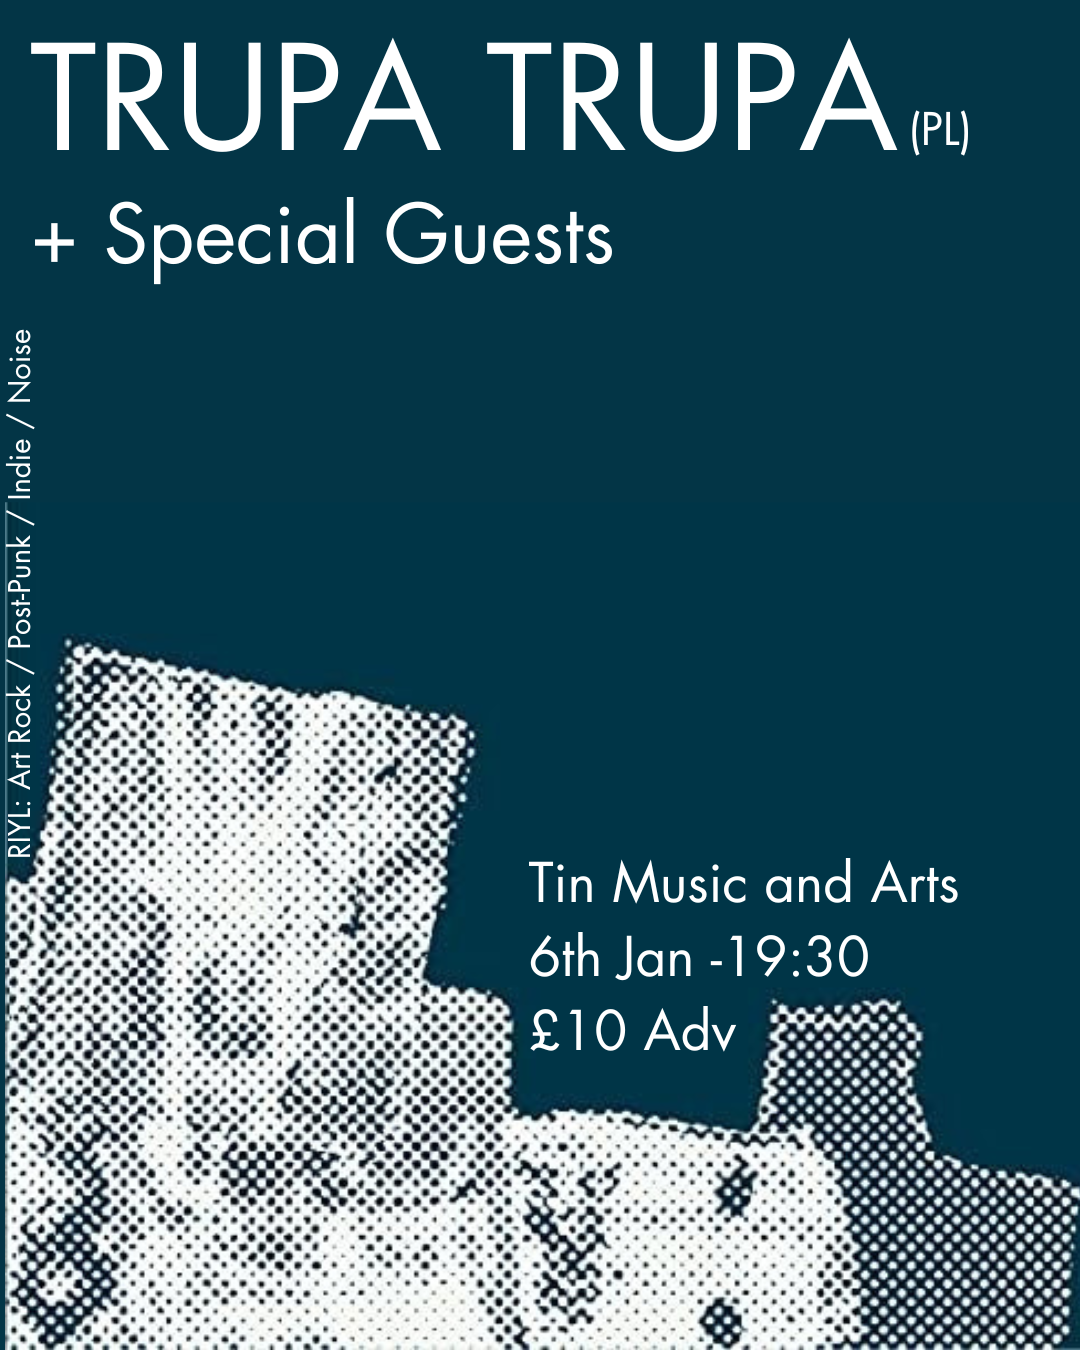 Poster for Trupa Trupa at The Tin Music and Arts on Saturday 6th January. Tickets are £10 in advance, doors are at 7.30pm. Text says "RIYL: Art Rock / Post-Punk / Indie / Noise".